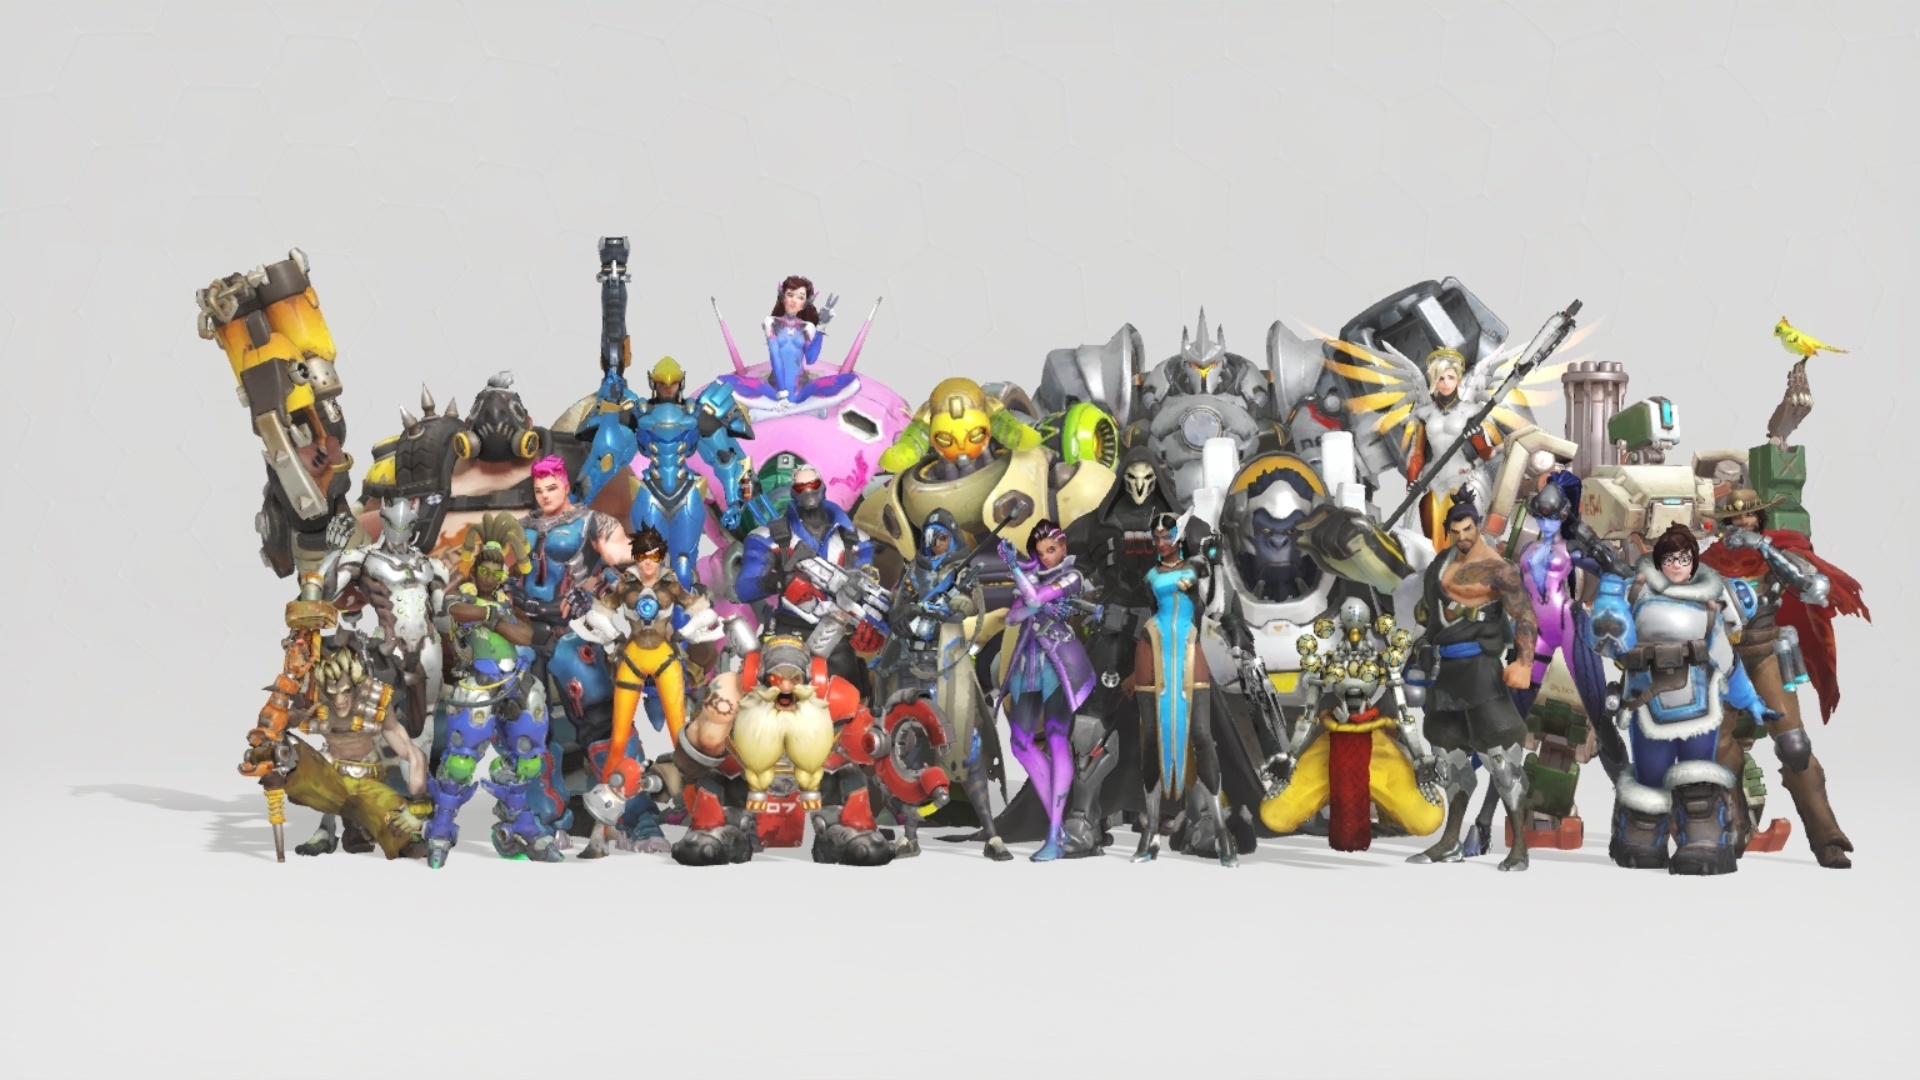 Overwatch Free Weekend May 26-29, Anniversary Event, Save $20 on Overwatch: Game of the Year